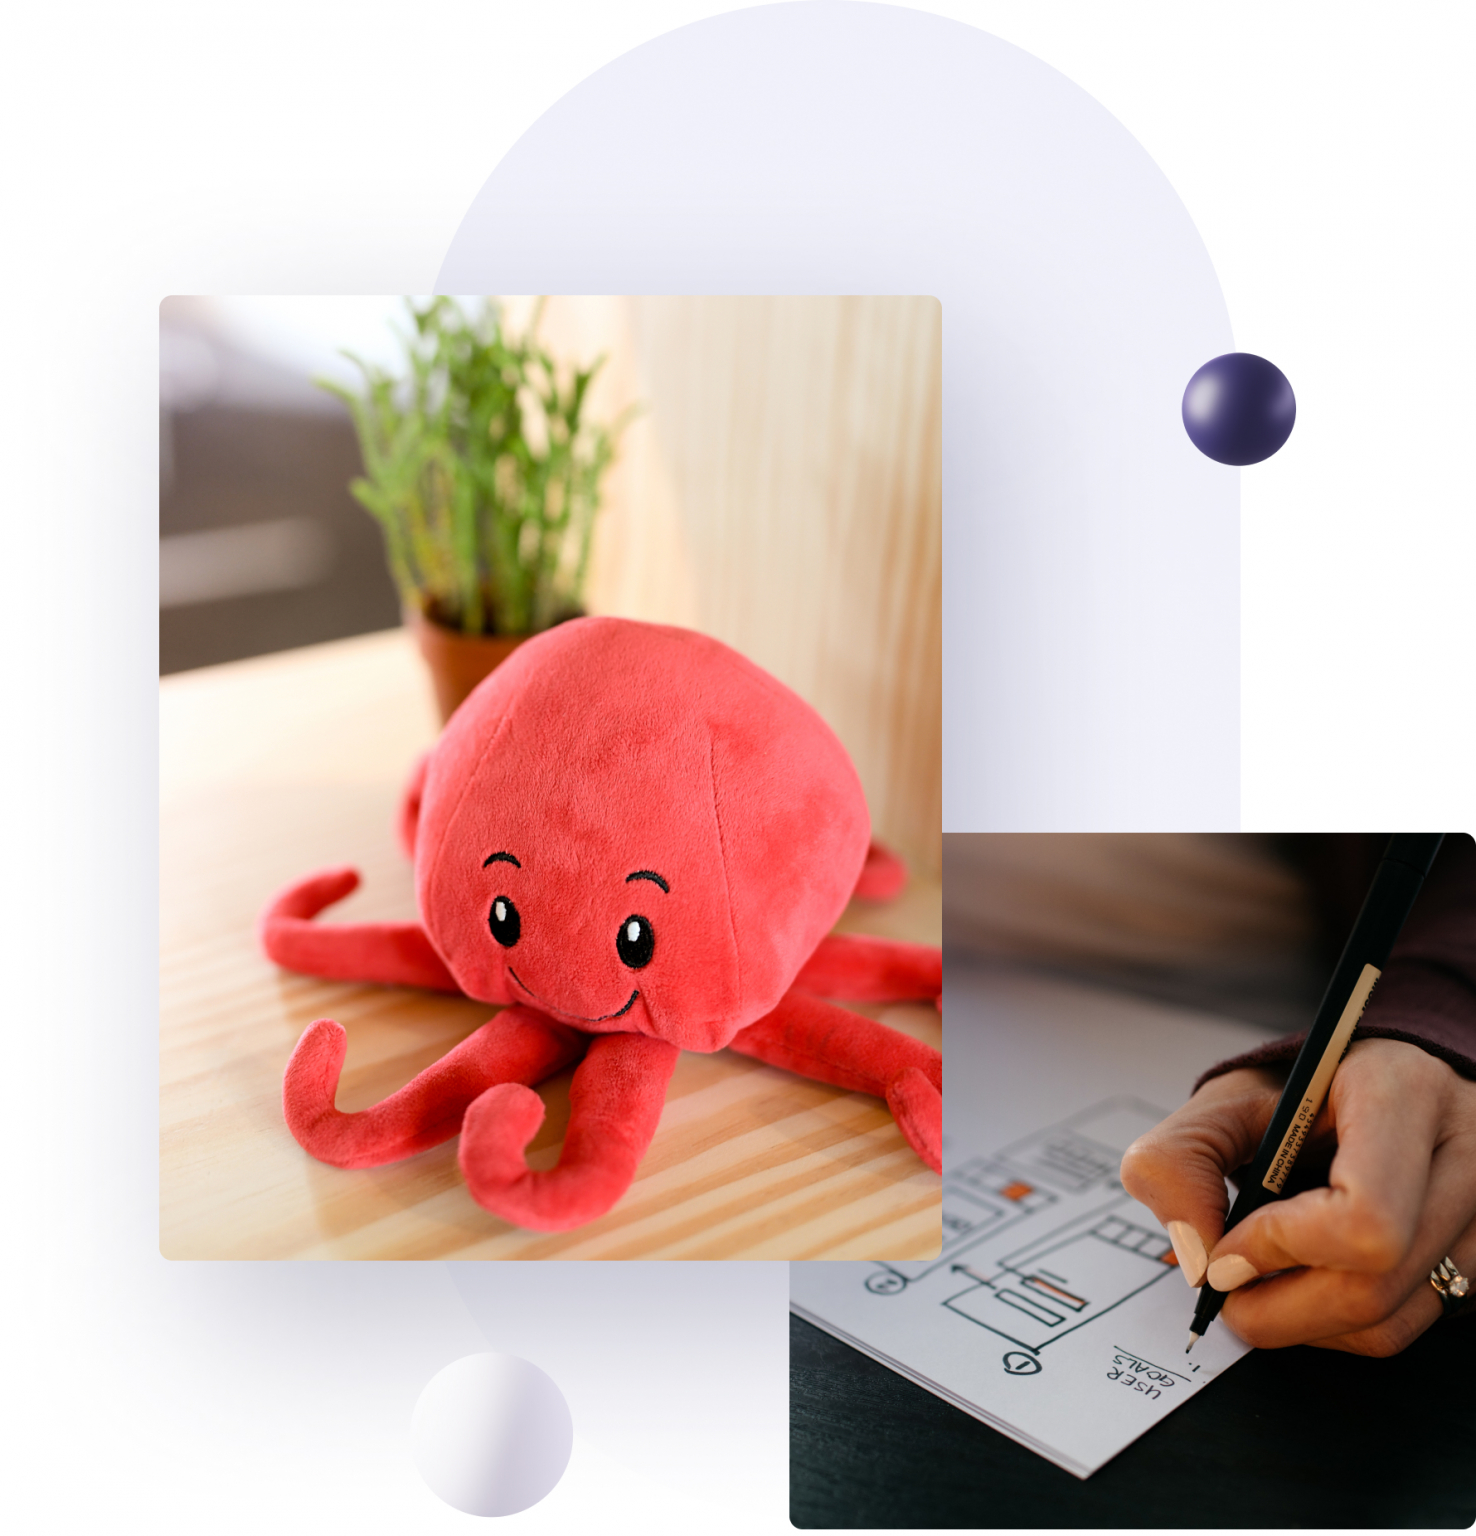 Pictures of Octobot's mascot and a person designing wireframes.